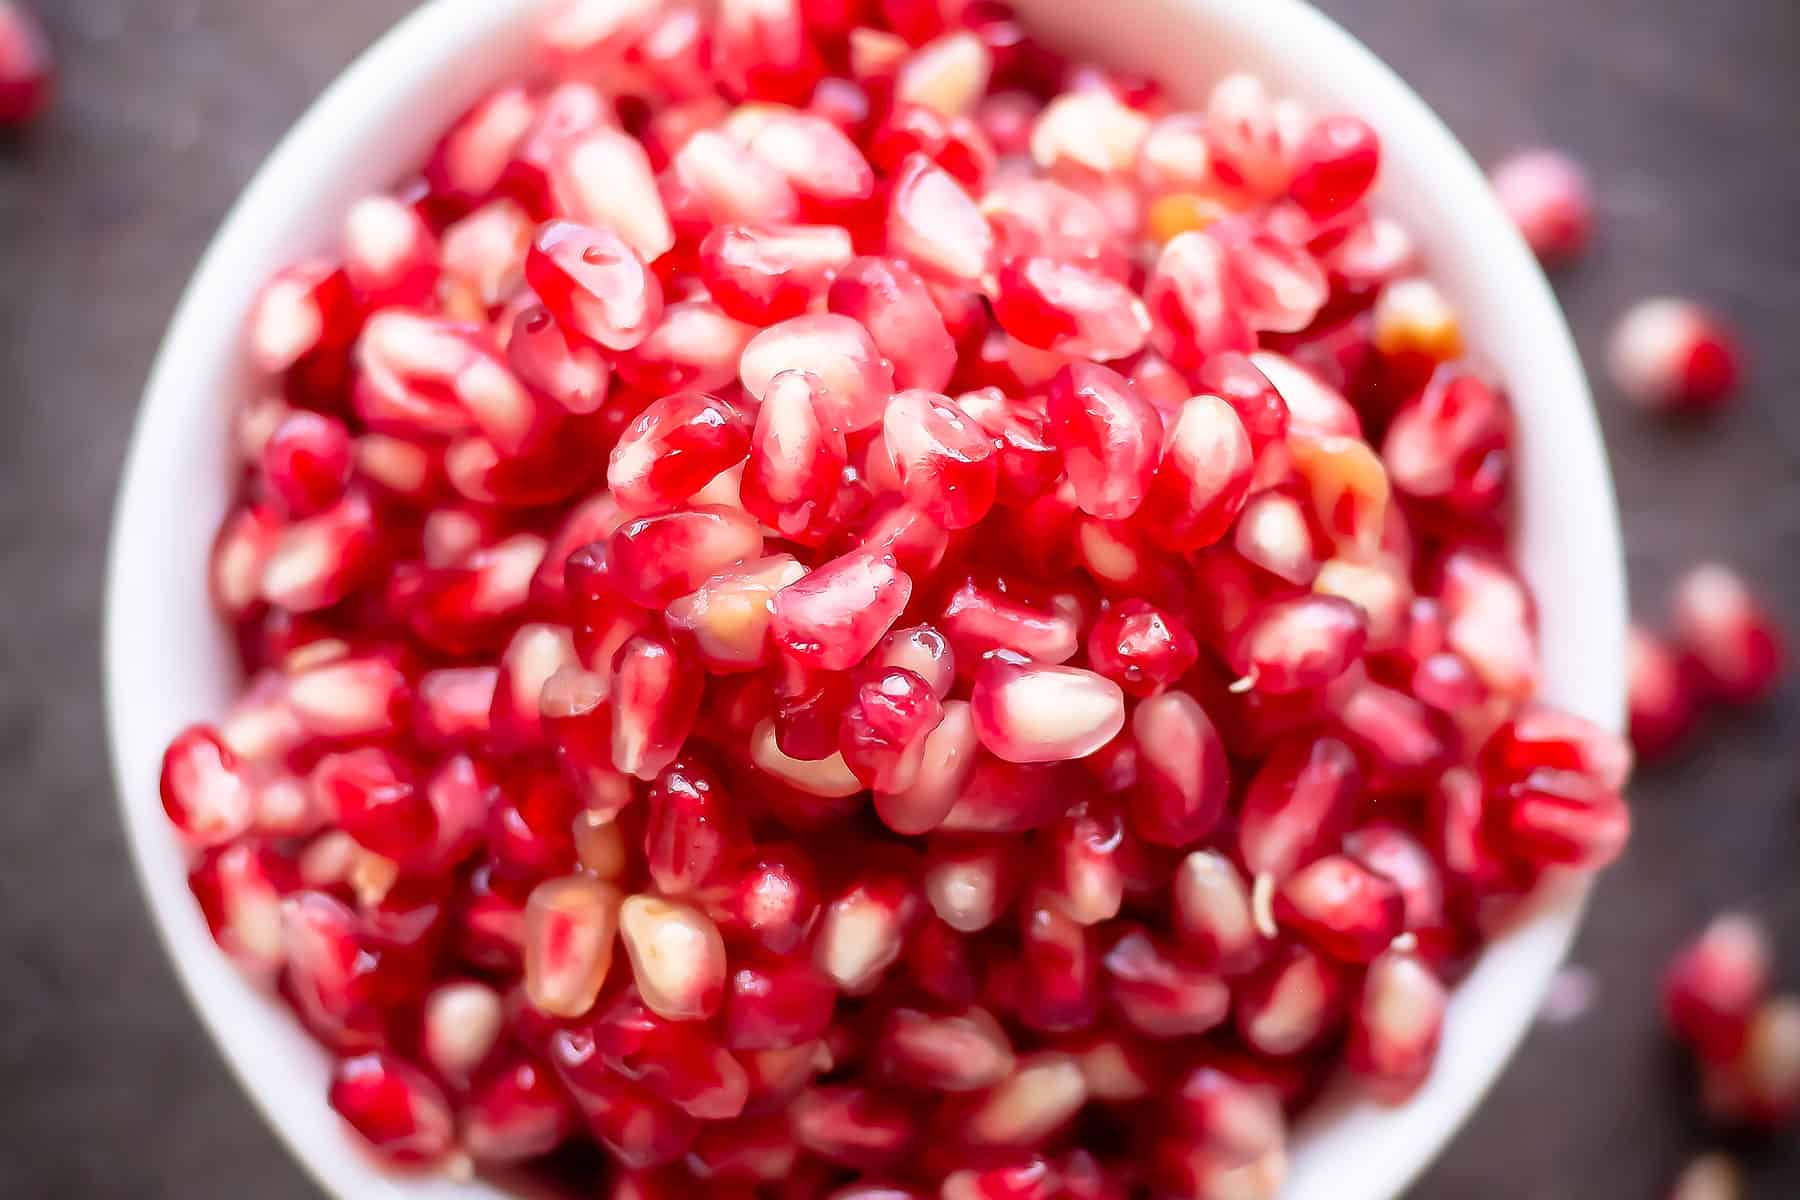 pomegranate pearls are kept ready in a bowl for making the punch